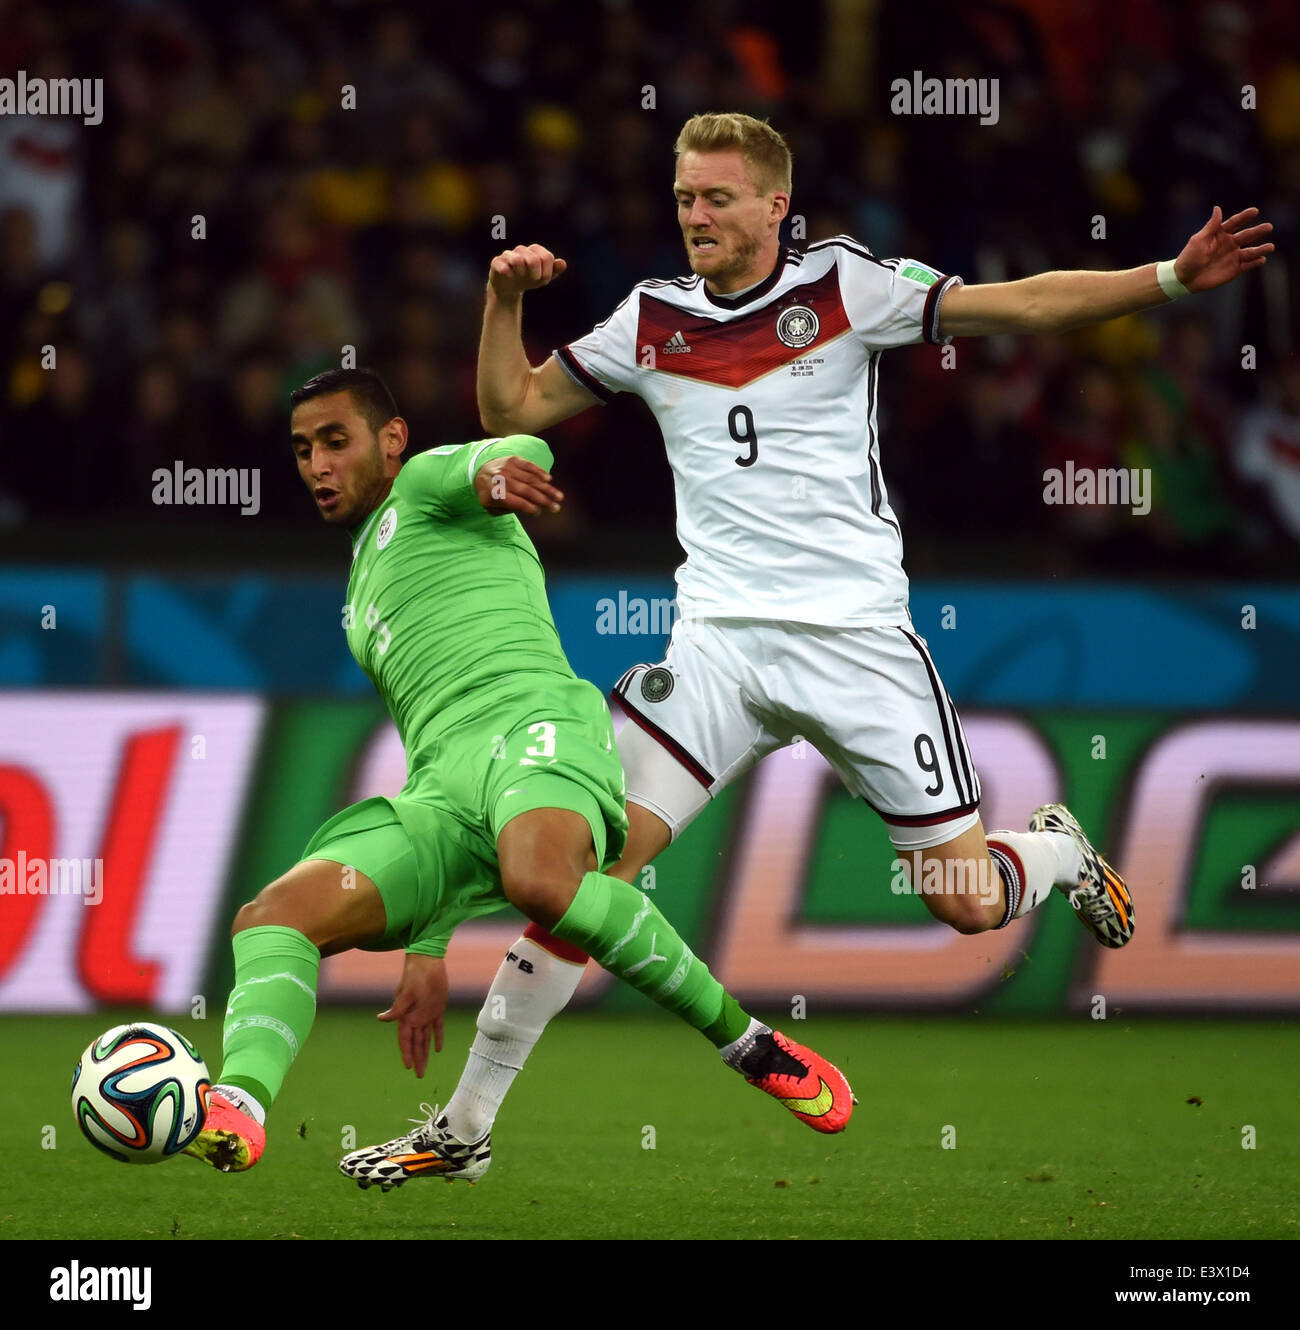 Porto Alegre, Brazil. 30th June, 2014. Algeria's Faouzi Ghoualm (L) vies with Germany's Andre Schurrle during a Round of 16 match between Germany and Algeria of 2014 FIFA World Cup at the Estadio Beira-Rio Stadium in Porto Alegre, Brazil, on June 30, 2014. Credit:  Li Ga/Xinhua/Alamy Live News Stock Photo